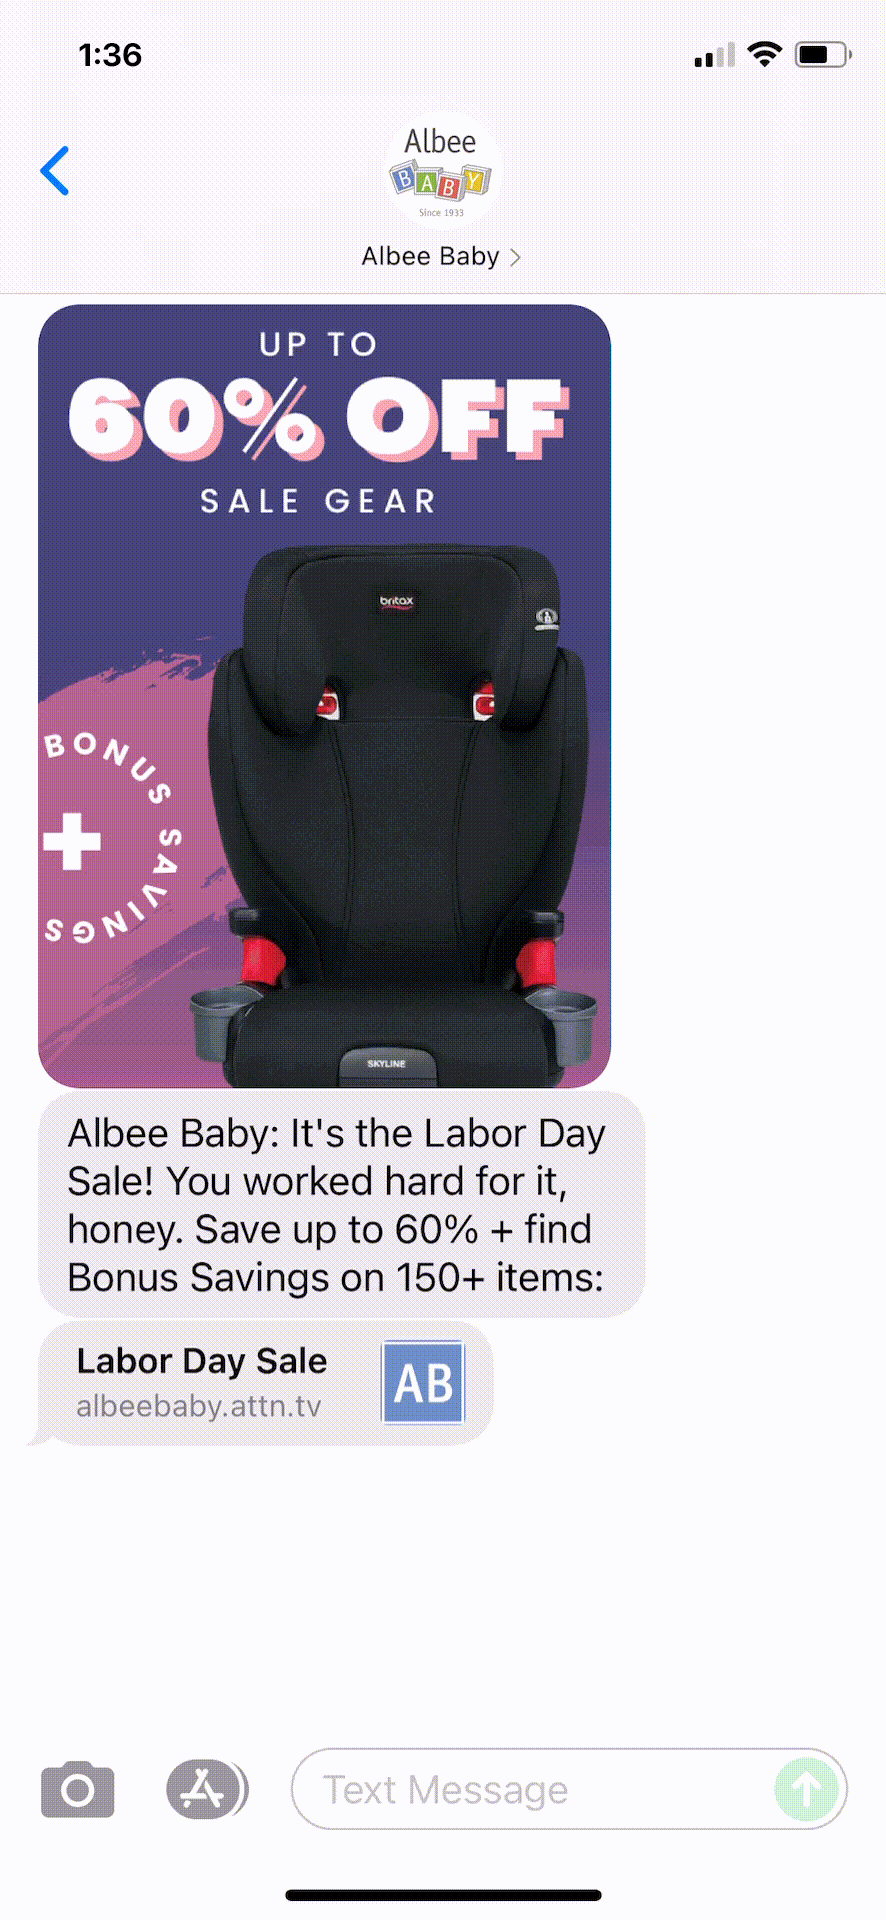 Albee-Baby-Text-Message-Marketing-Example-09.03.2021